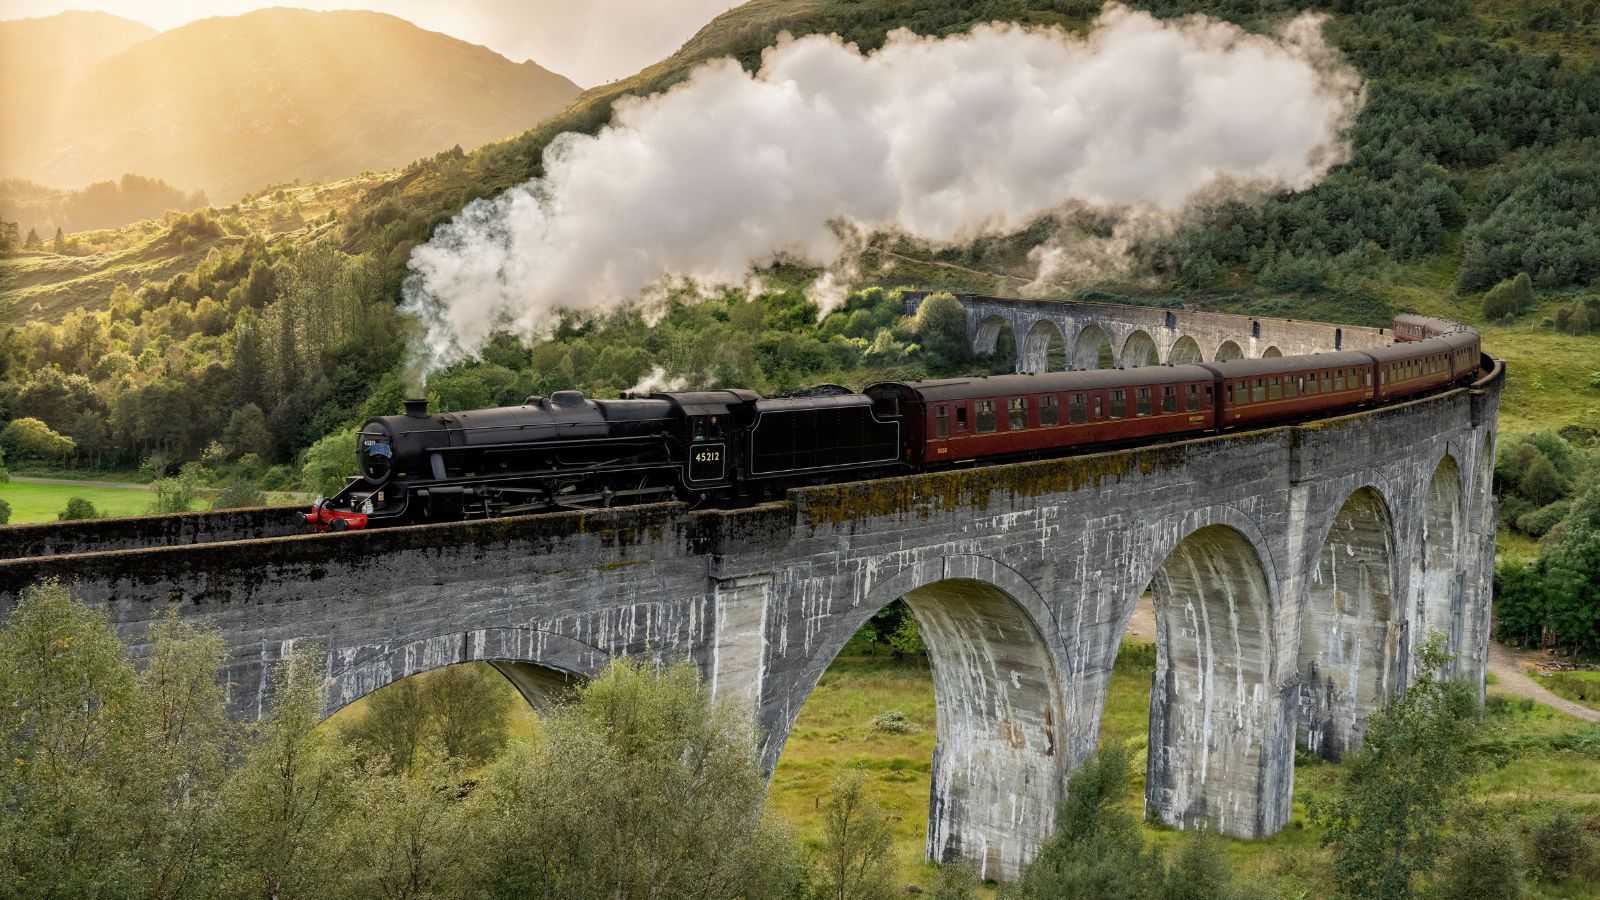 <p>Calling all Harry Potter fans! Remember those iconic shots of the Hogwarts Express chugging along a viaduct through rolling hills on its way to Hogwarts? Well, you can see it for yourself in Scotland.</p><p>In real life, you can watch the <em>Jacobite Steam Train</em> run across the <em>Glenfinnan Viaduct</em> by driving to the Glenfinnan Viaduct car park. From there, a signposted trail takes you to the perfect viewing point. Want to ride the train itself? It runs all week long from Fort William to Mallaig.</p>